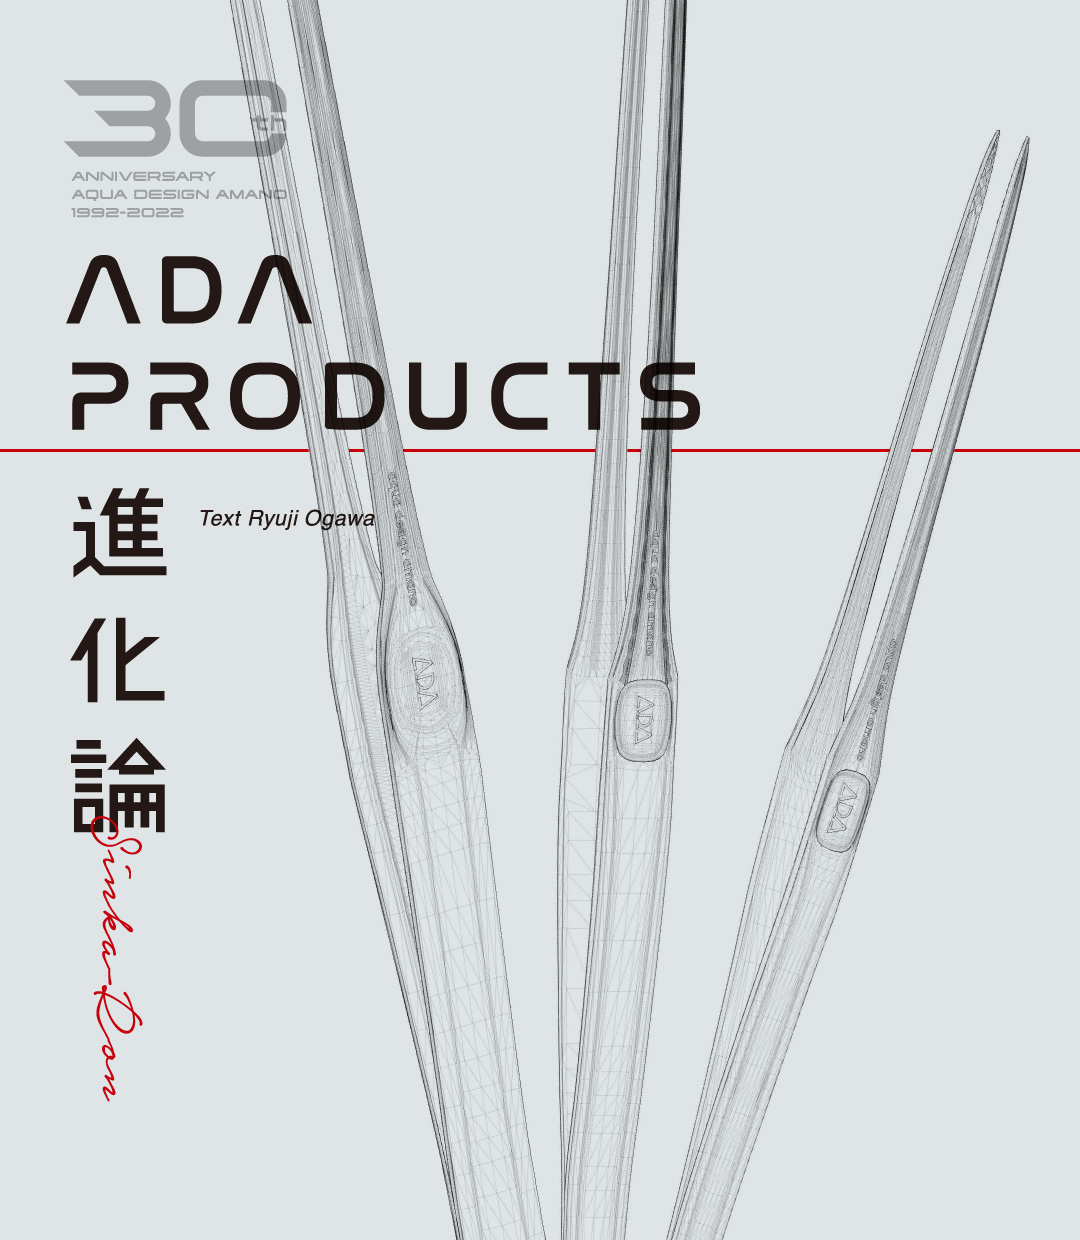 ADA PRODUCTS 進化論 「ピンセット・シリーズ」